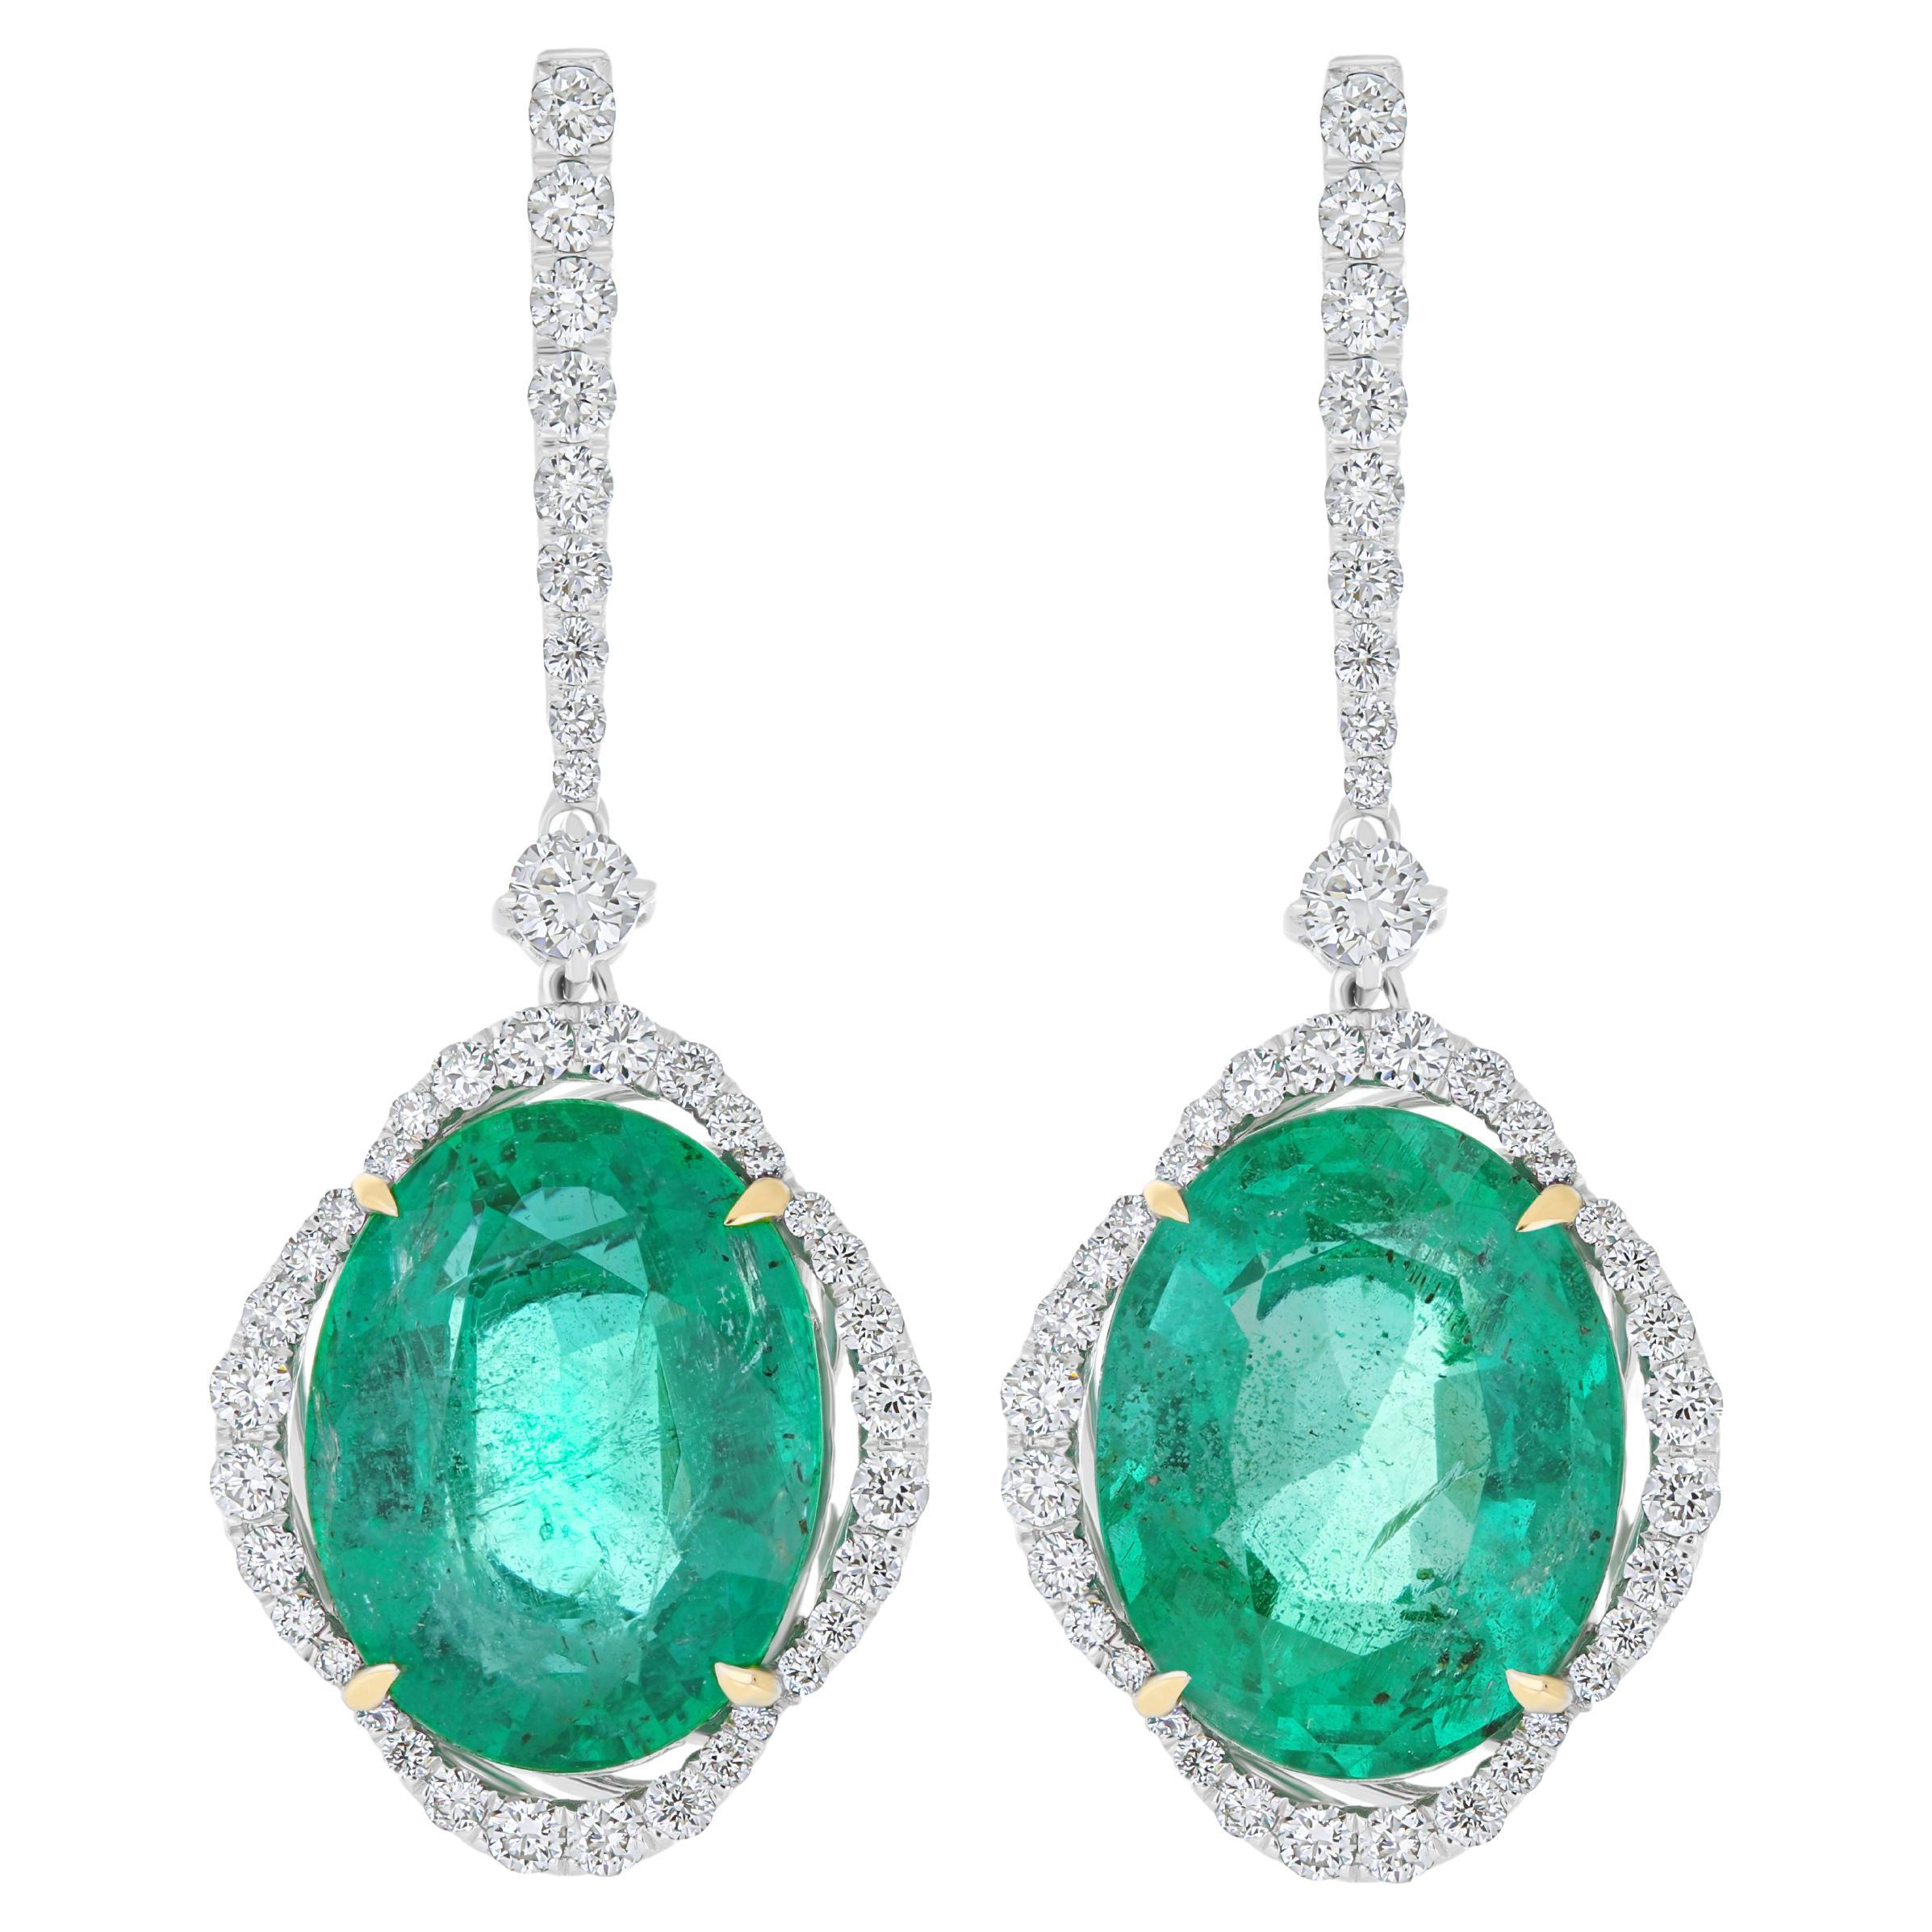  Emeralds and Daimond Drop Earrings in 18 Karat White Gold Hand-Craft Earring